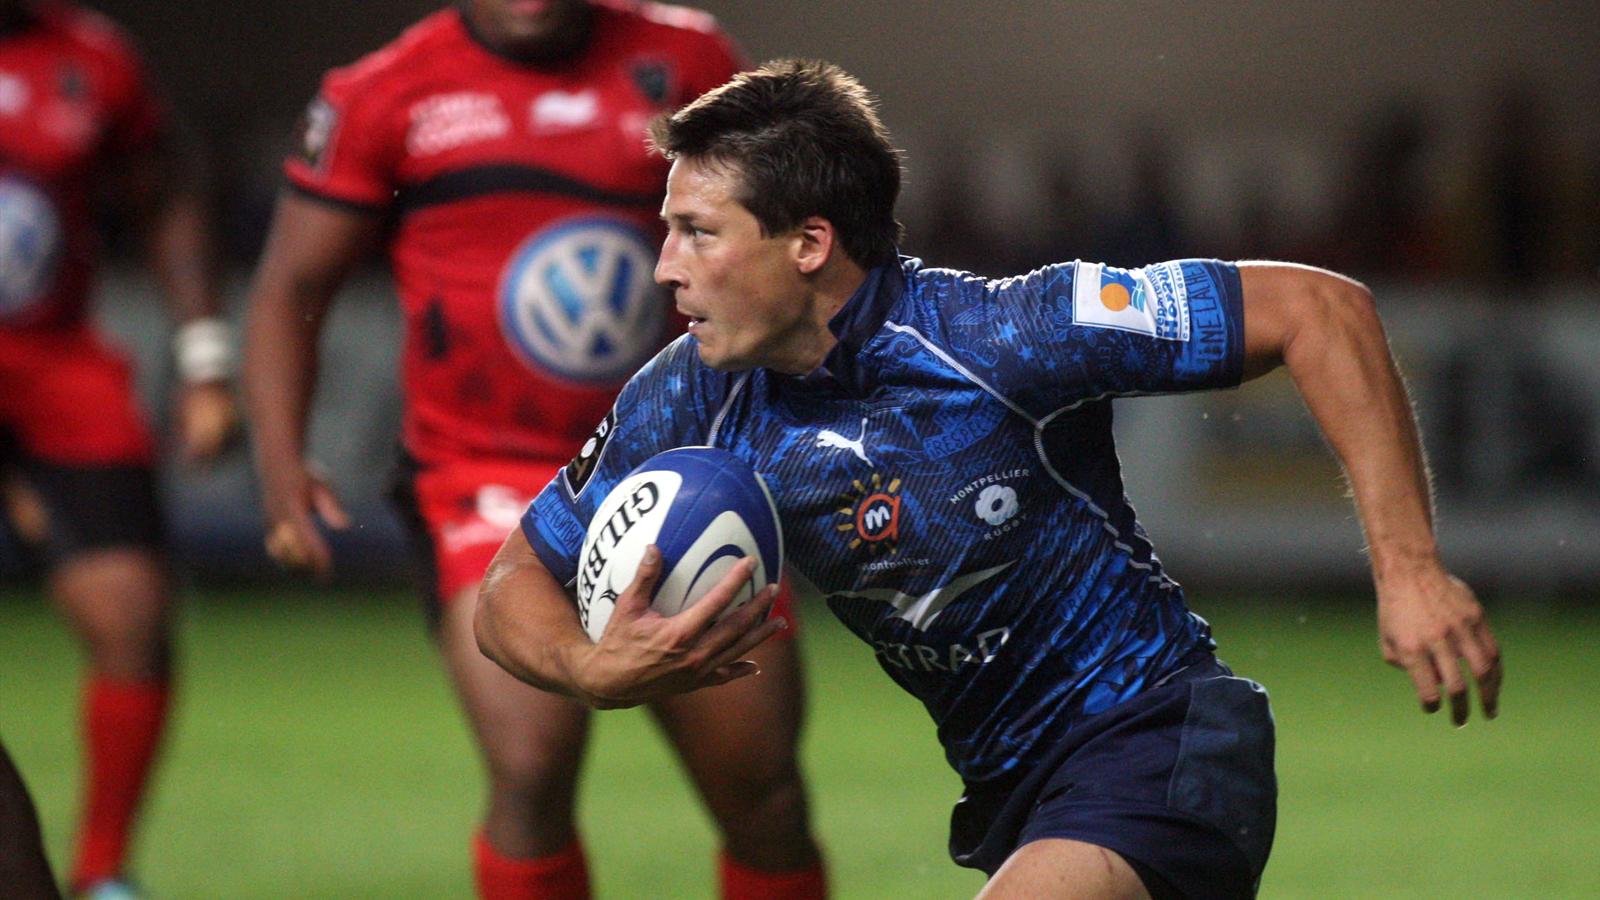 Match Rugby RC Toulon vs Montpellier HR en direct streaming live